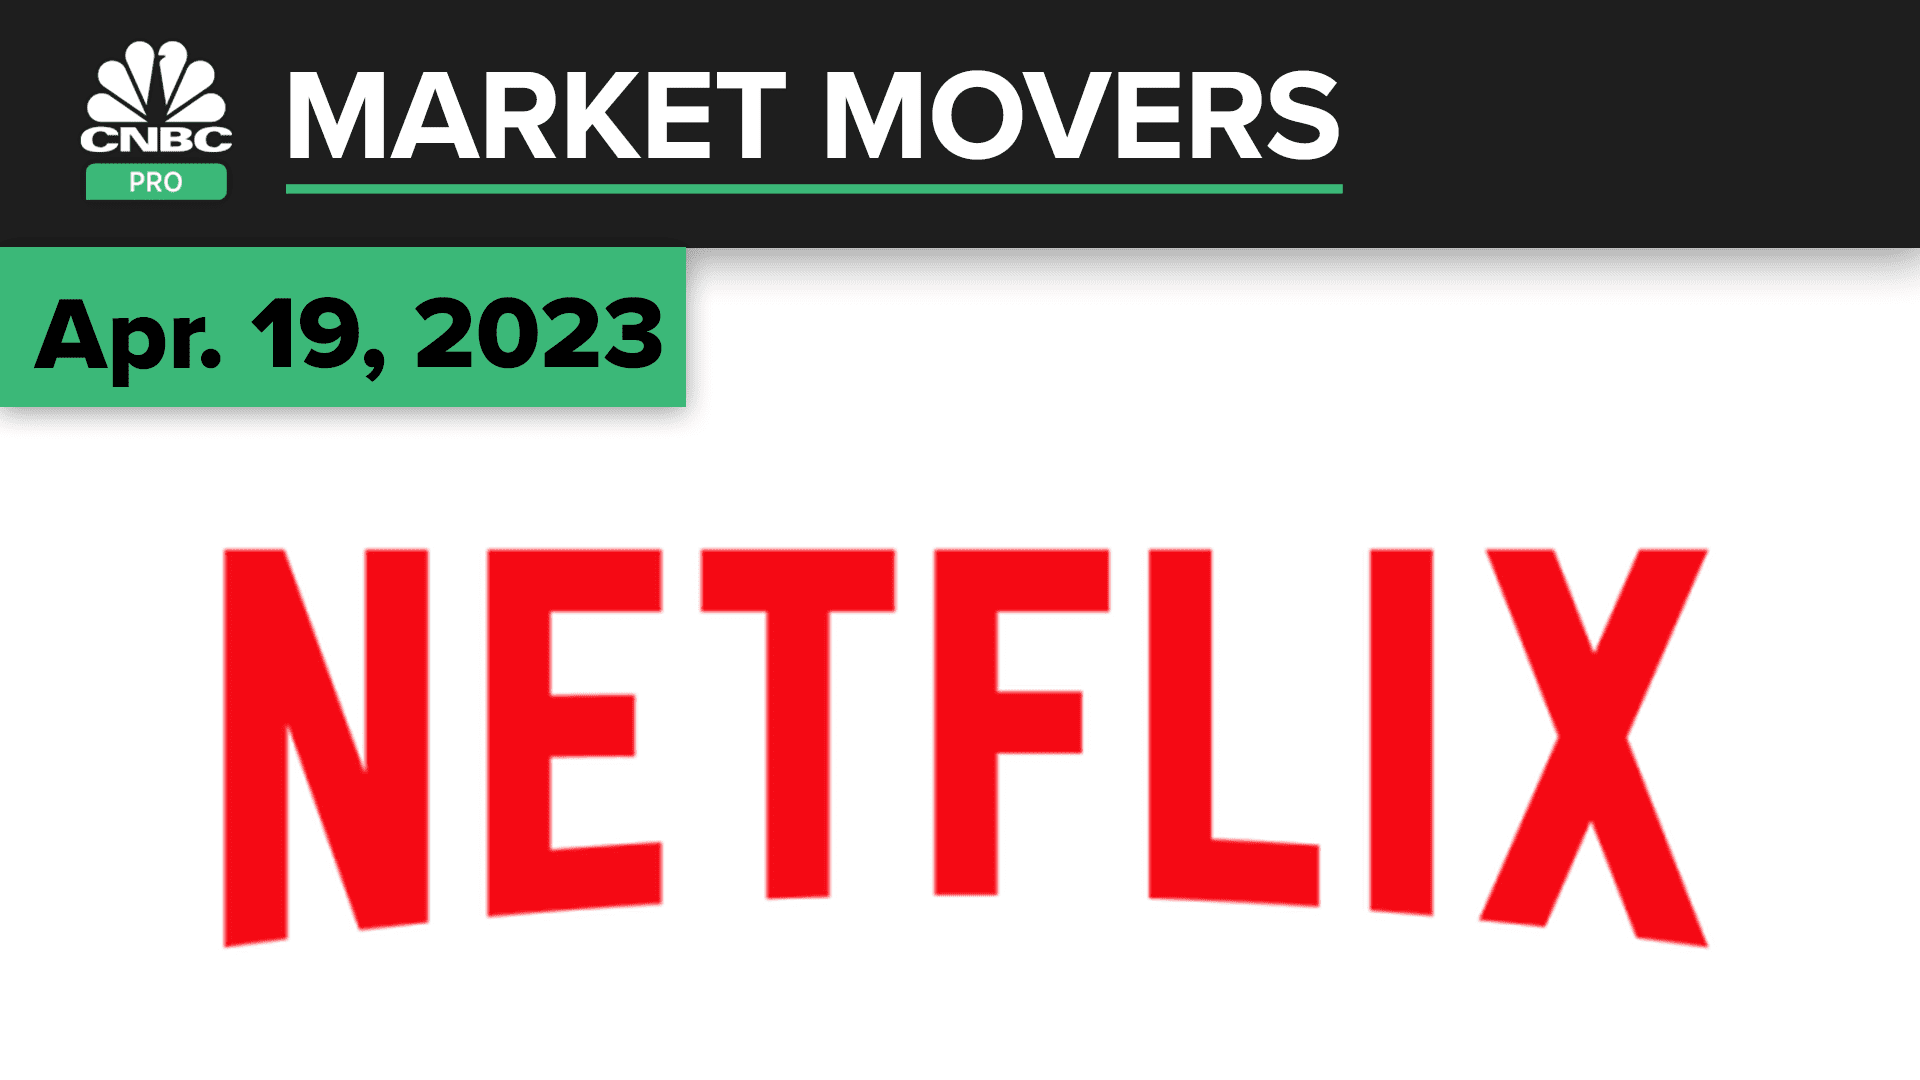 Netflix shares drop after mixed earnings. Here's what the experts have to say